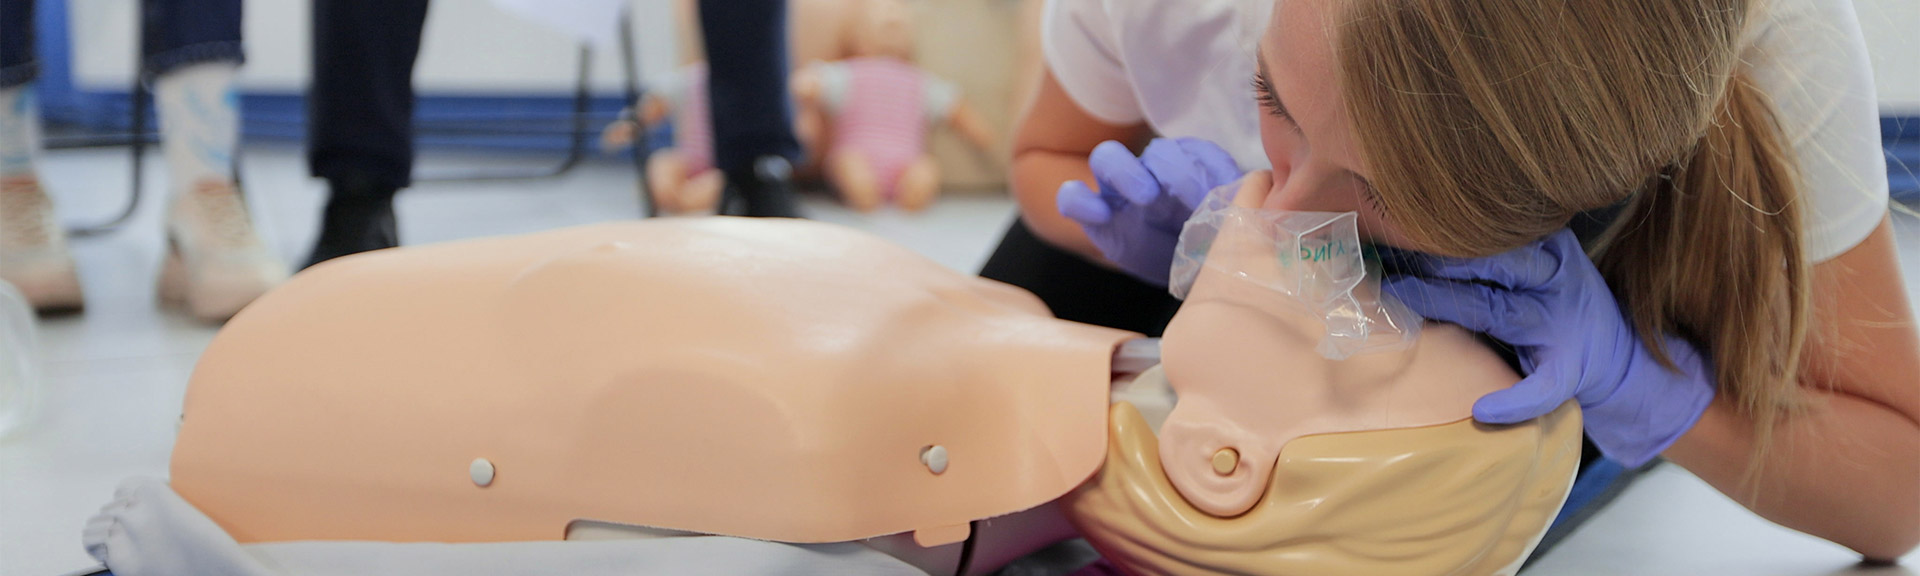 CPR Instructor teaching with Laerdal Little Anne CPR manikin in a class